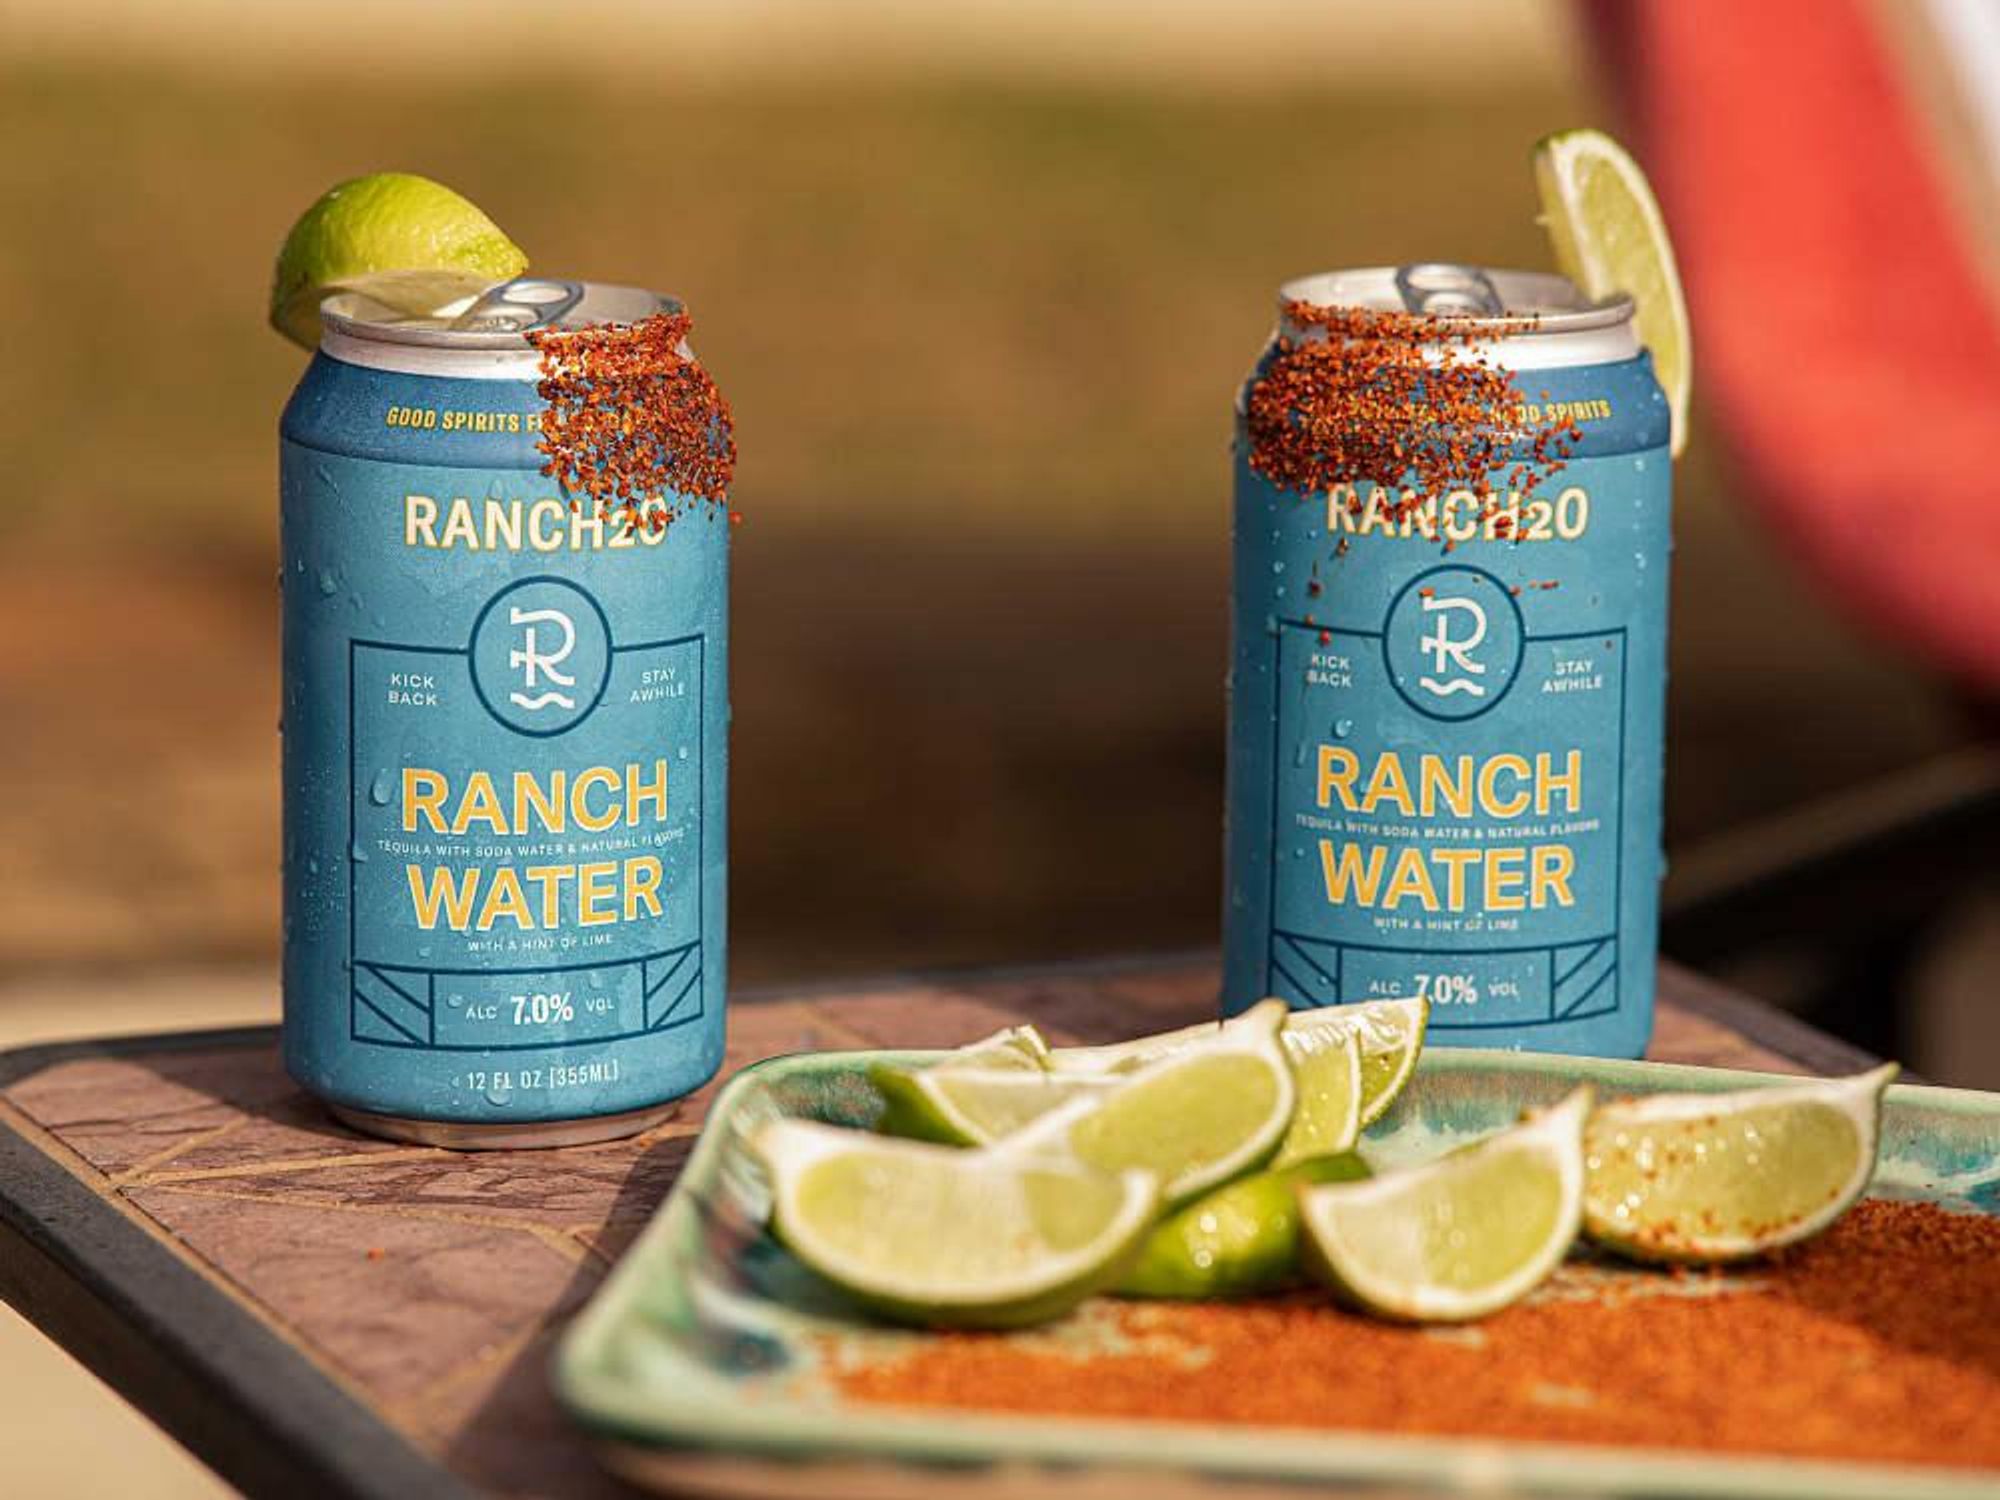 RancH20 water